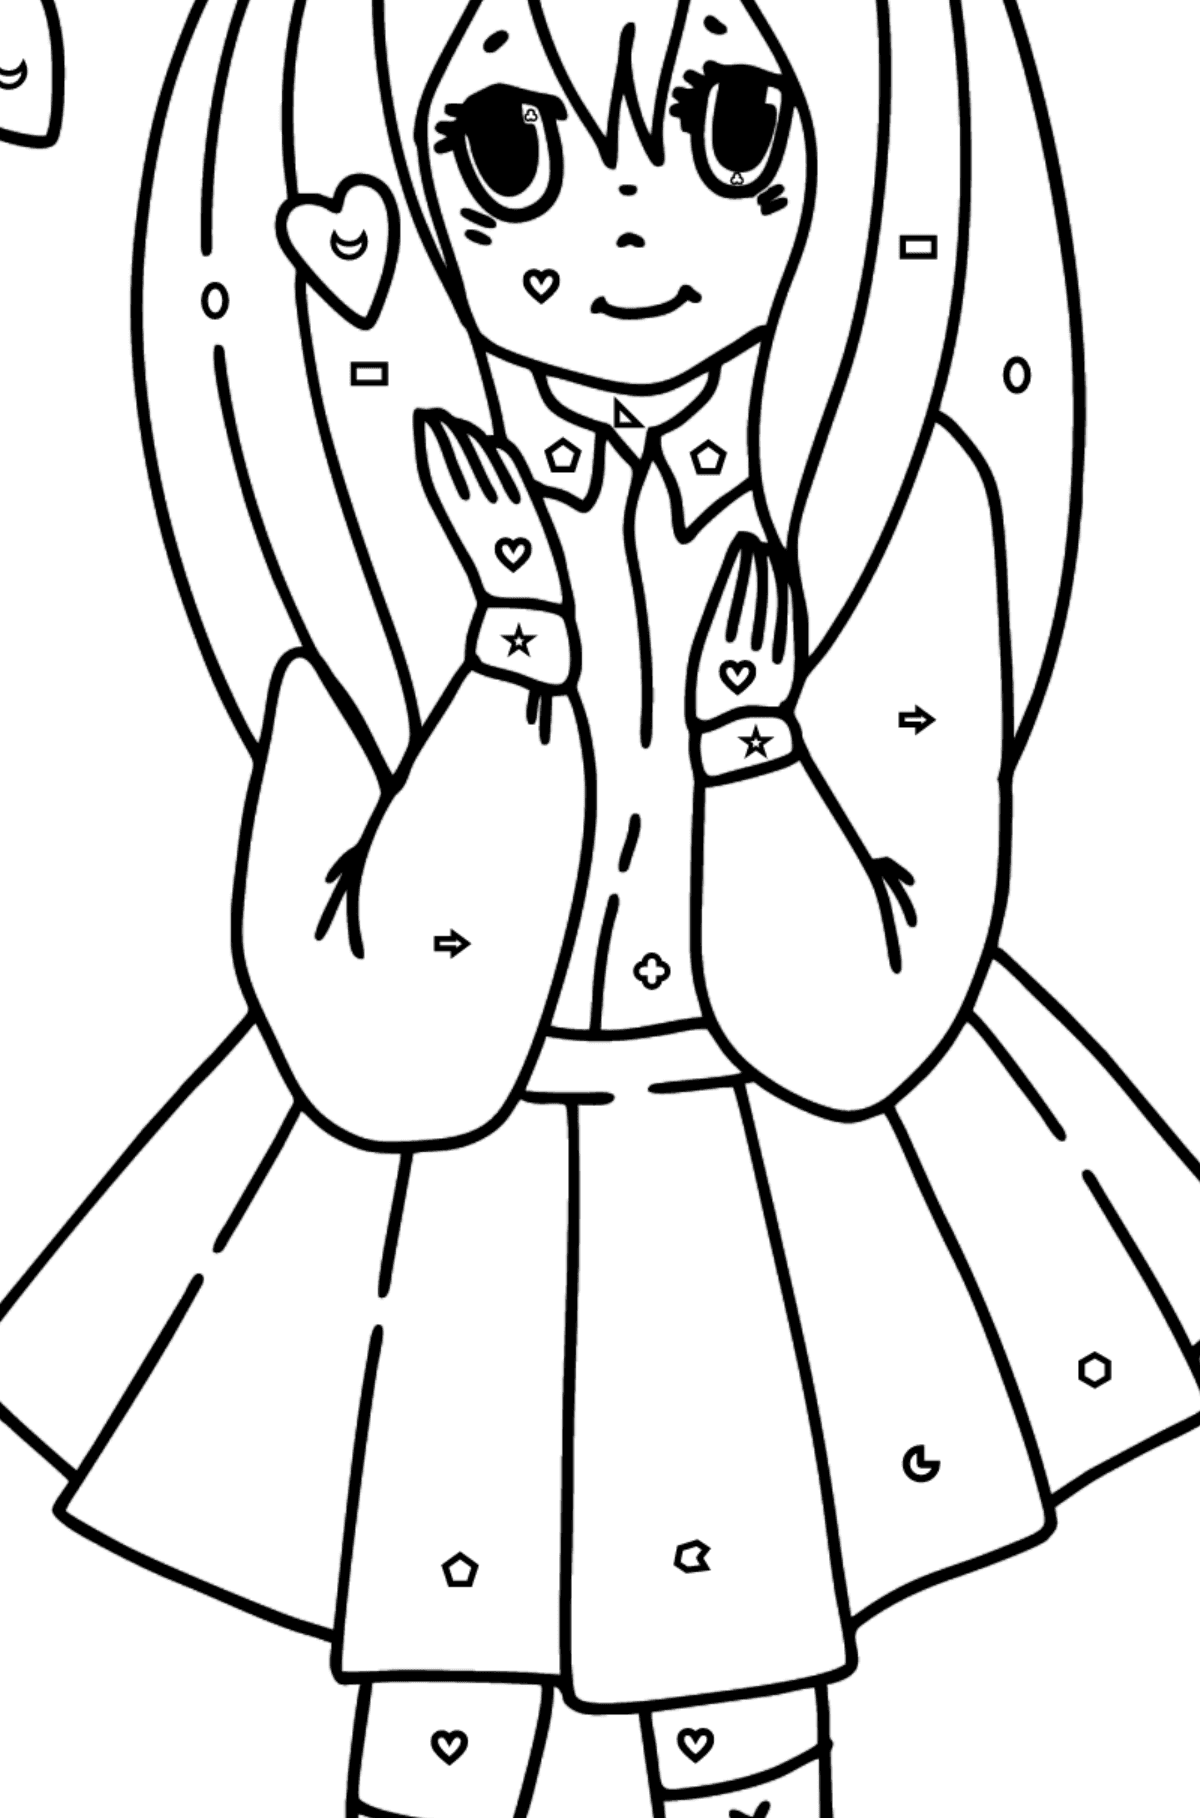 Anime girl in love coloring page - Coloring by Geometric Shapes for Kids